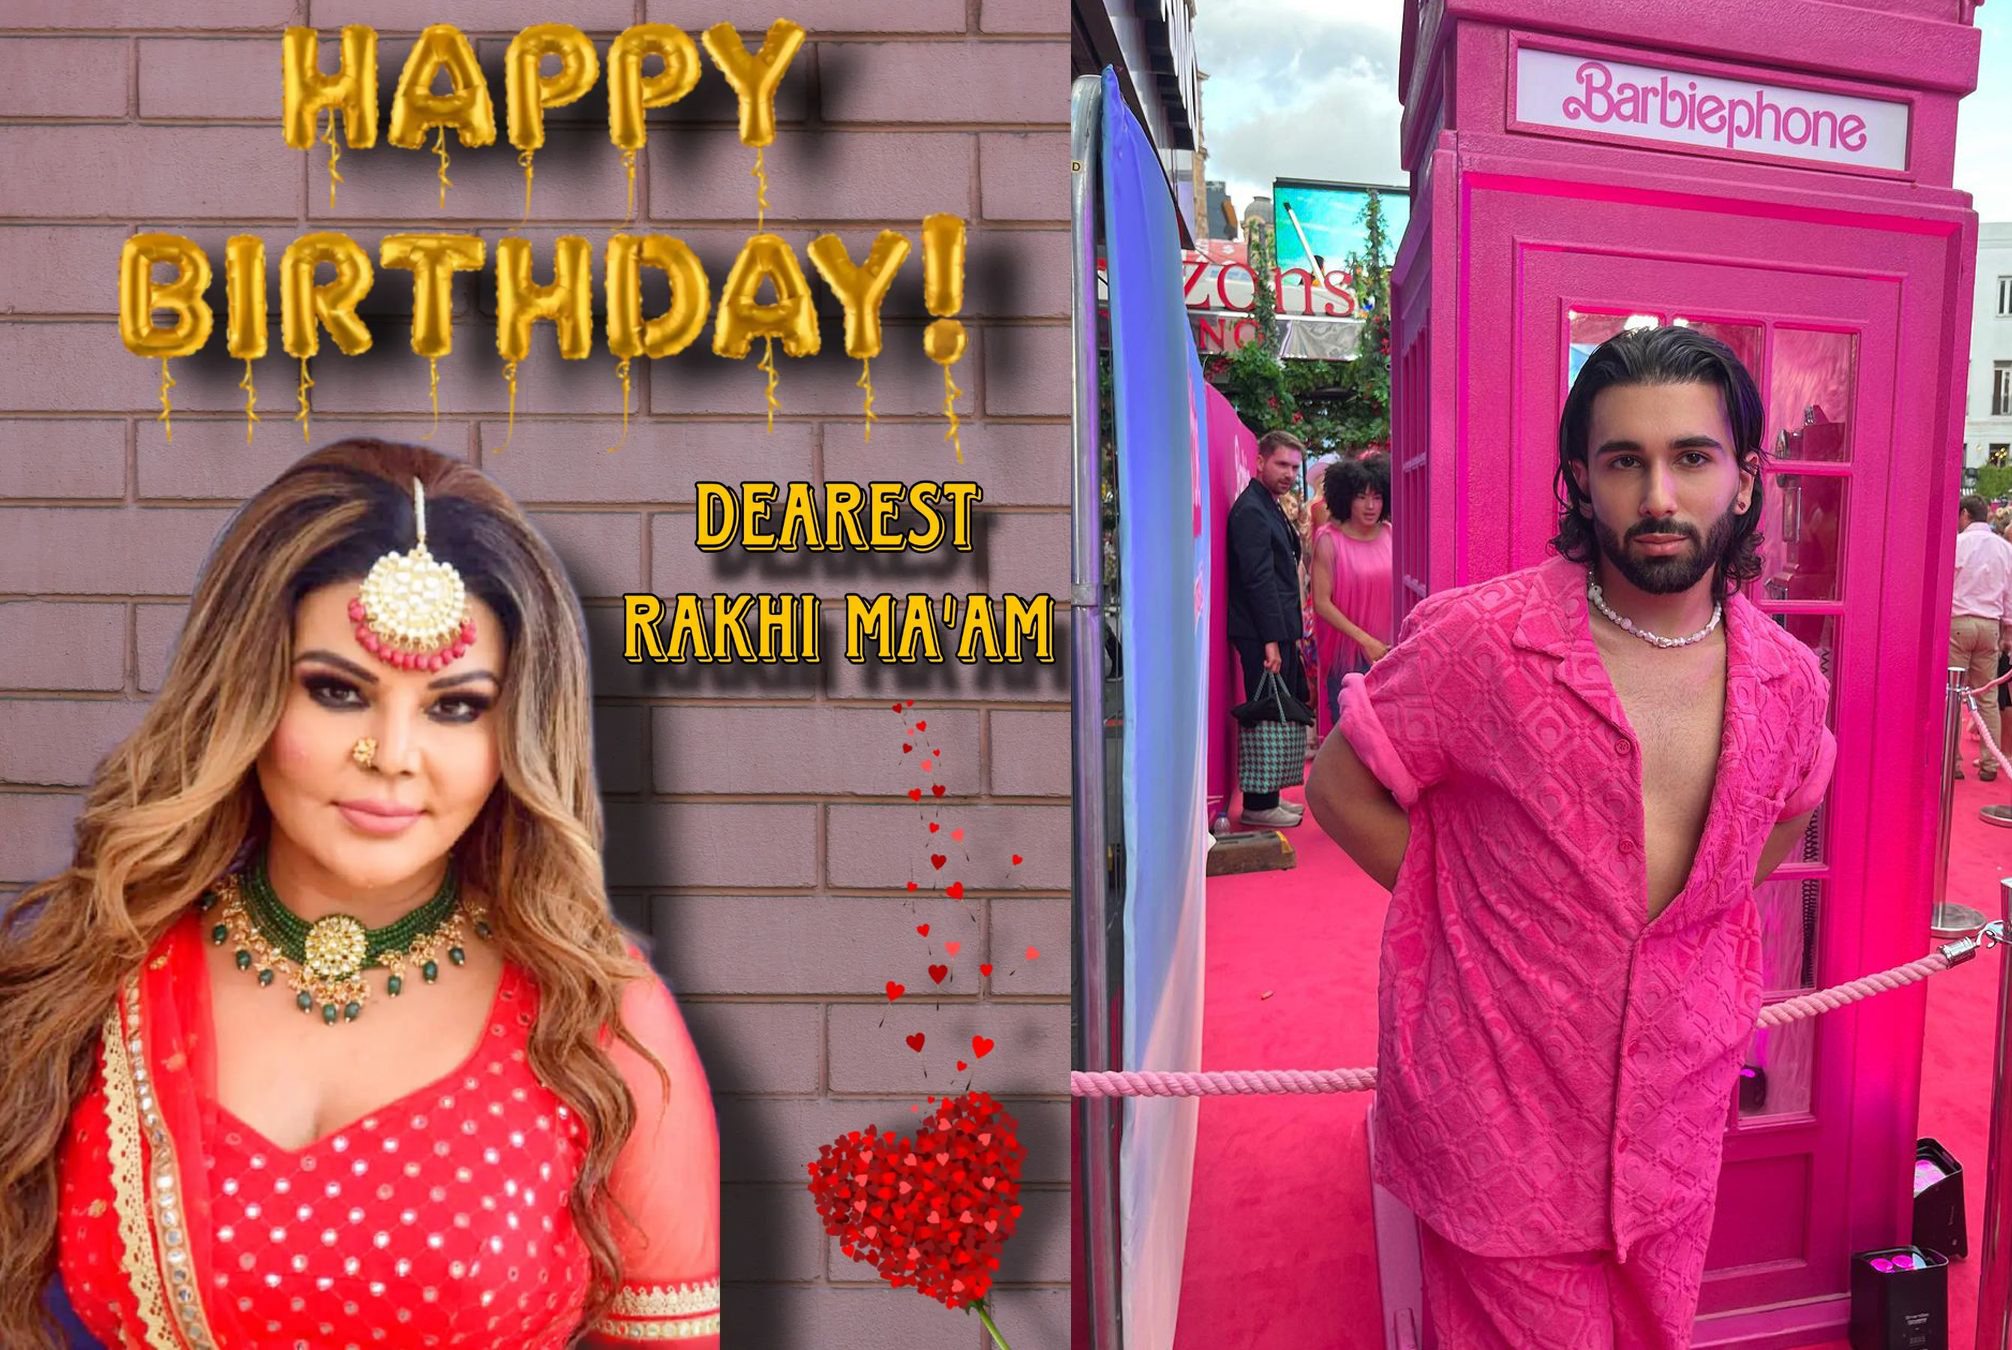 Orry Conveys A Heart-Warming Birthday Wish For Actress Rakhi Sawant; He Says, “Stay Iconic, Hope We Meet Soon When You Return”!